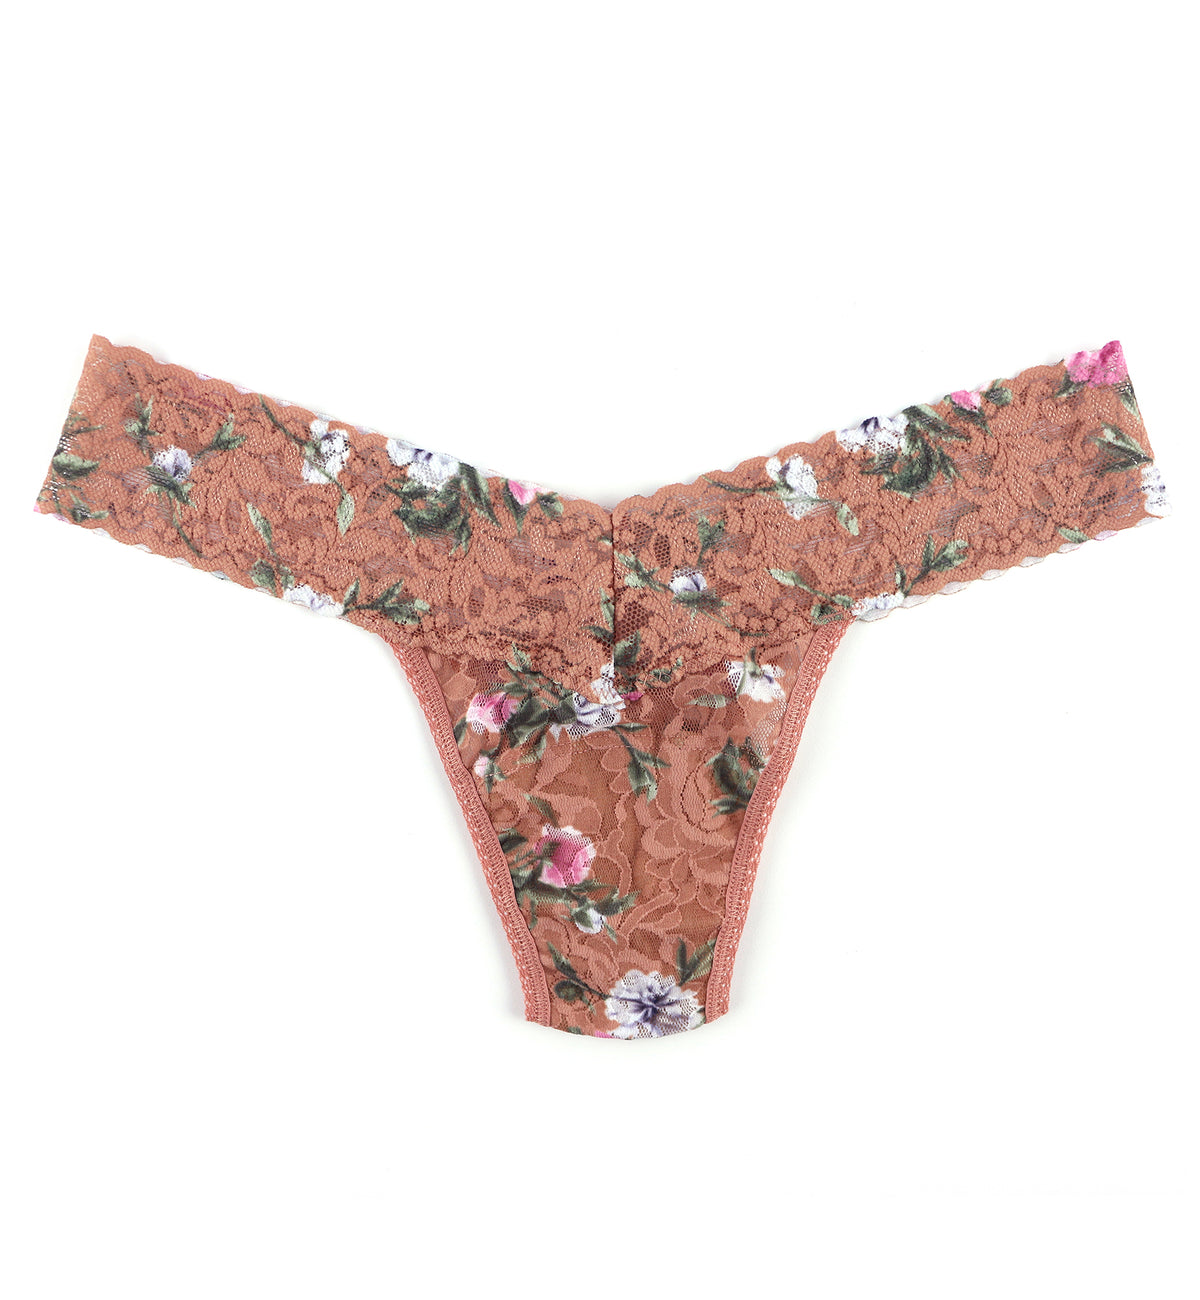 Hanky Panky Signature Lace Printed Low Rise Thong (PR4911P),Terracotta Rose - Terracotta Rose,One Size